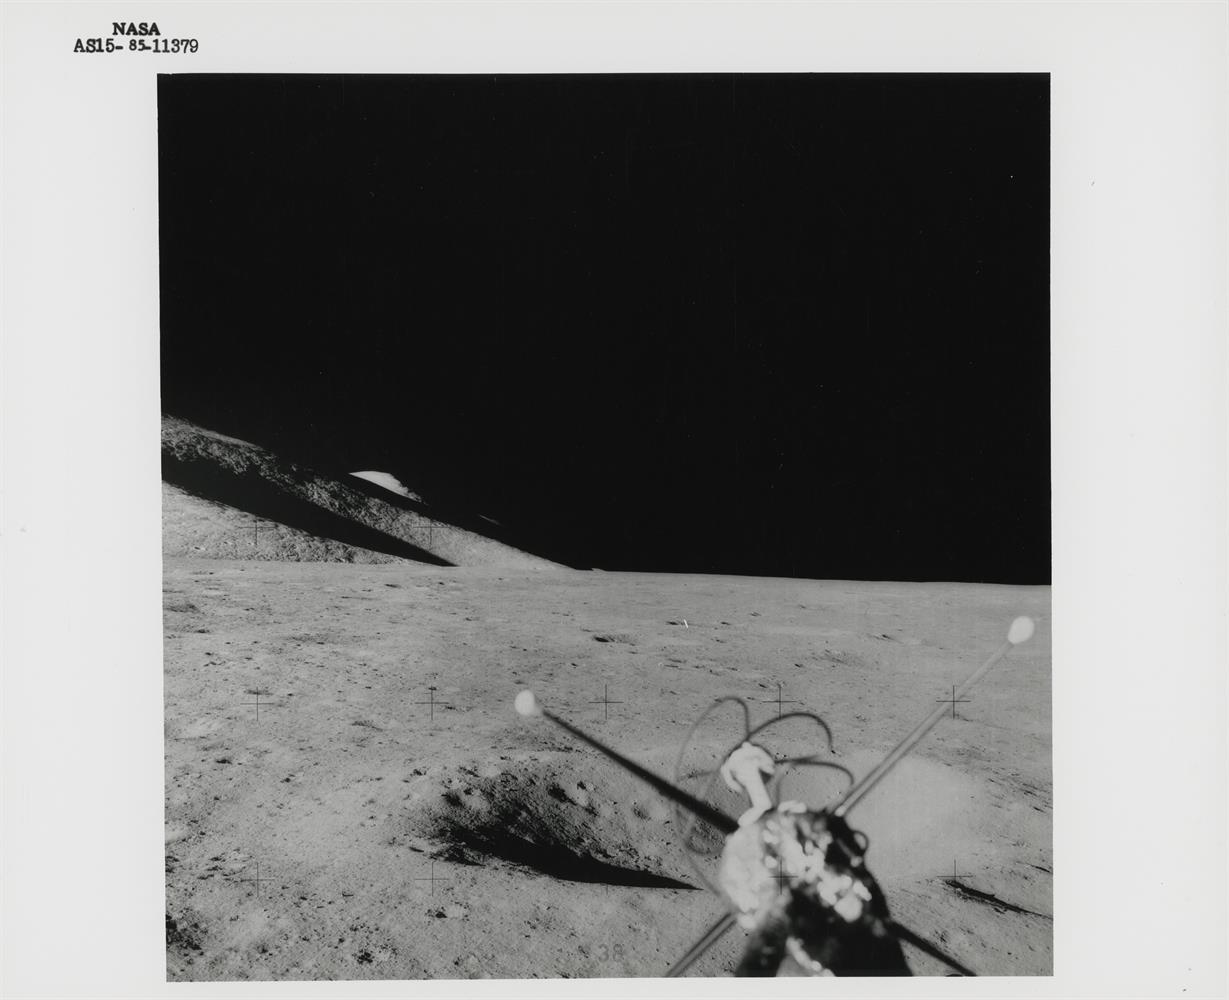 Views of the Hadley-Apennine landing site after touchdown, Apollo 15, July-August 1971, stand up EVA - Image 4 of 5